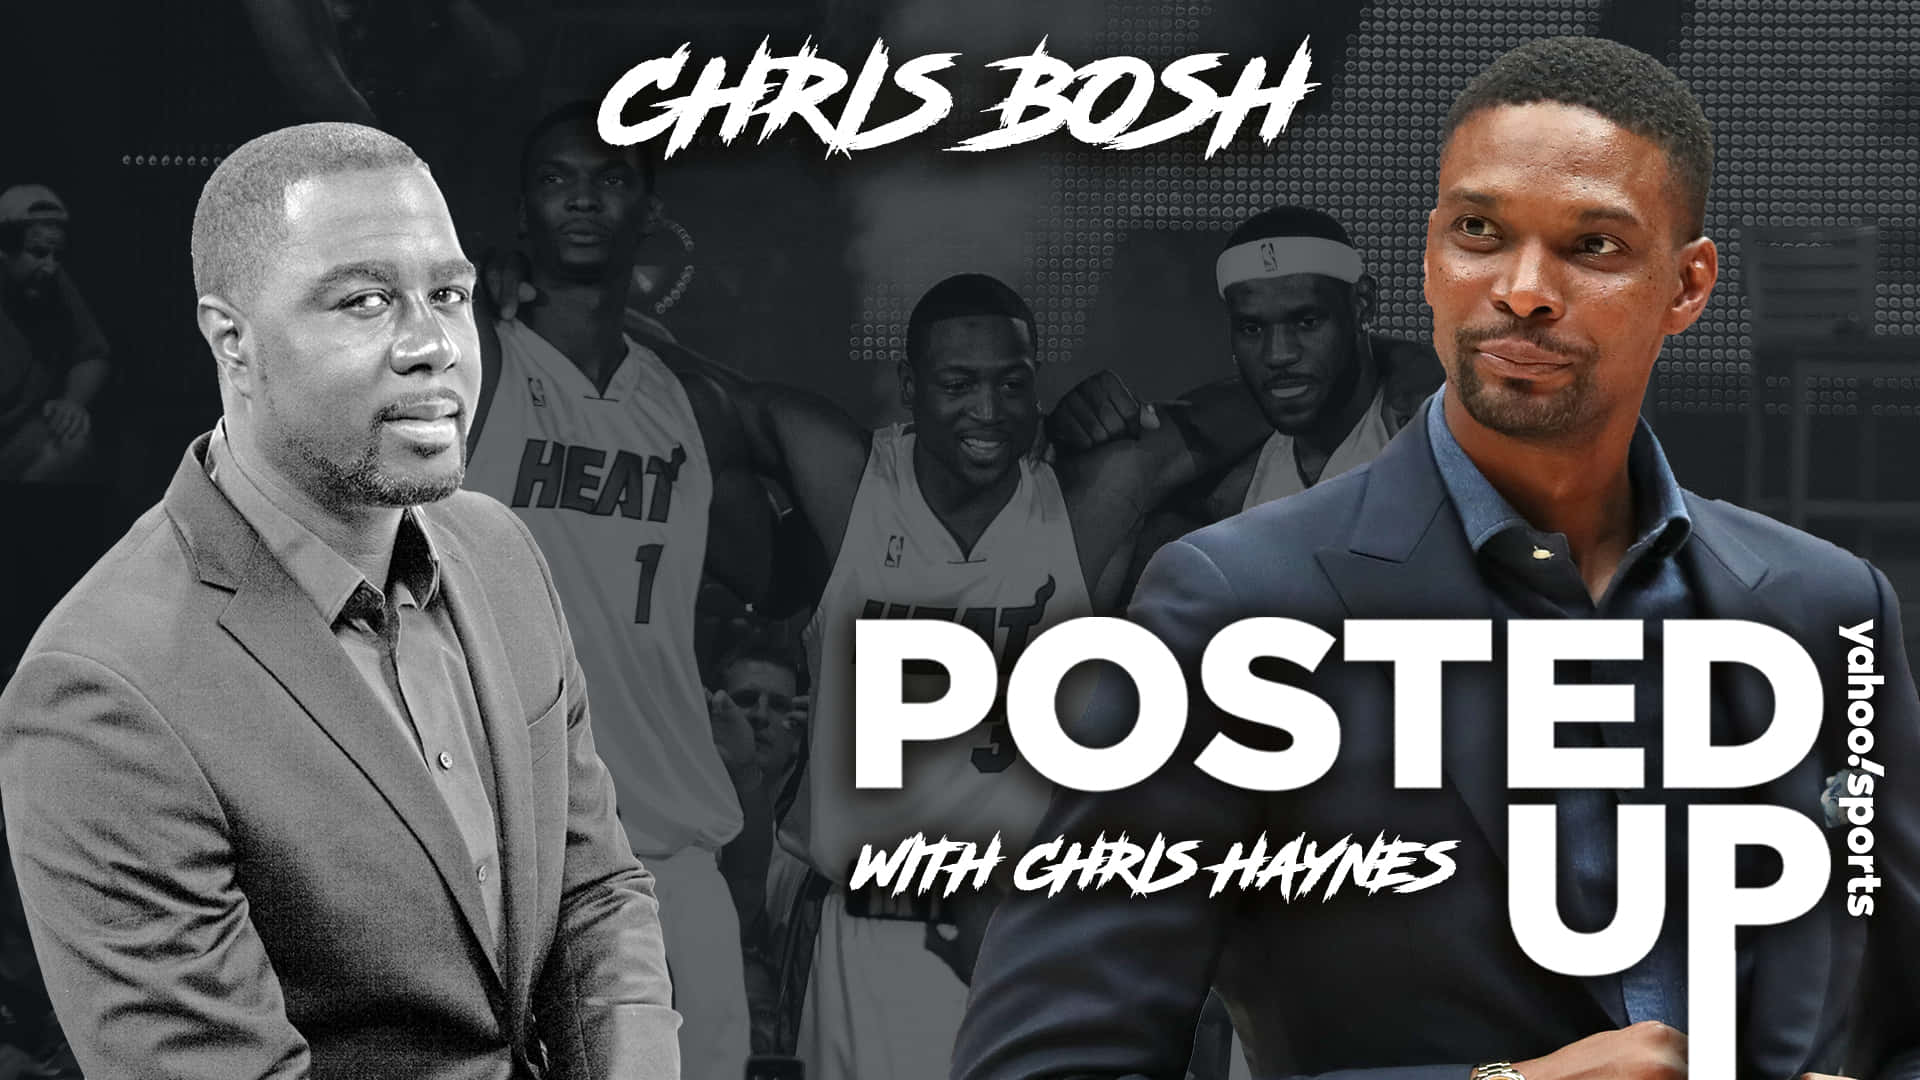 Chris Bosh Posted Up With Chris Haynes Wallpaper